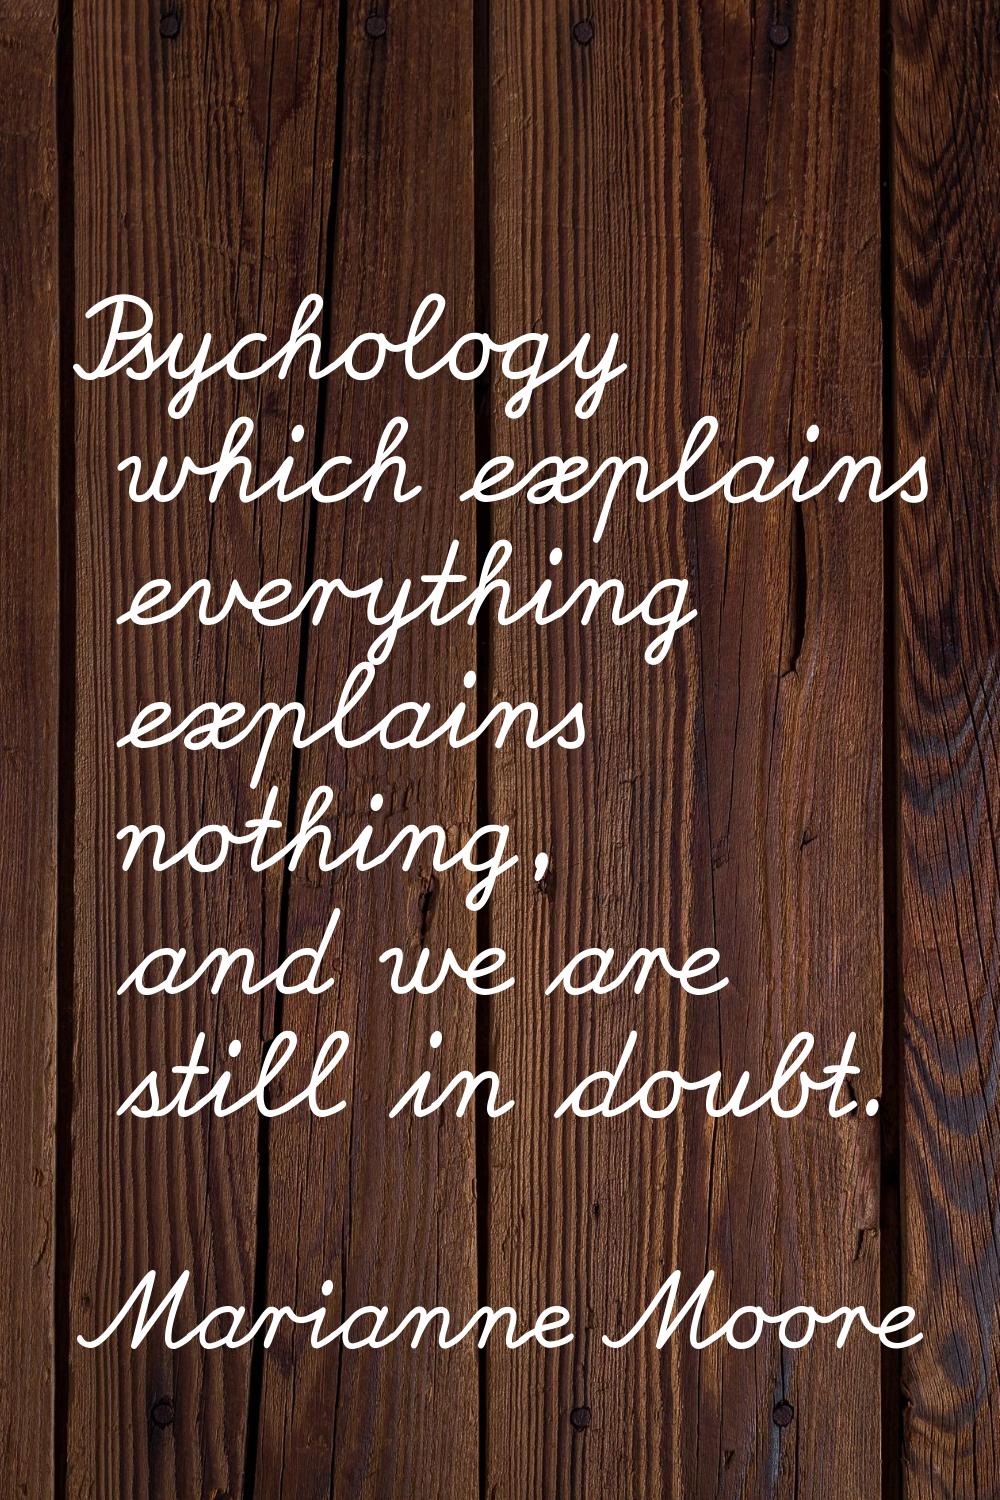 Psychology which explains everything explains nothing, and we are still in doubt.